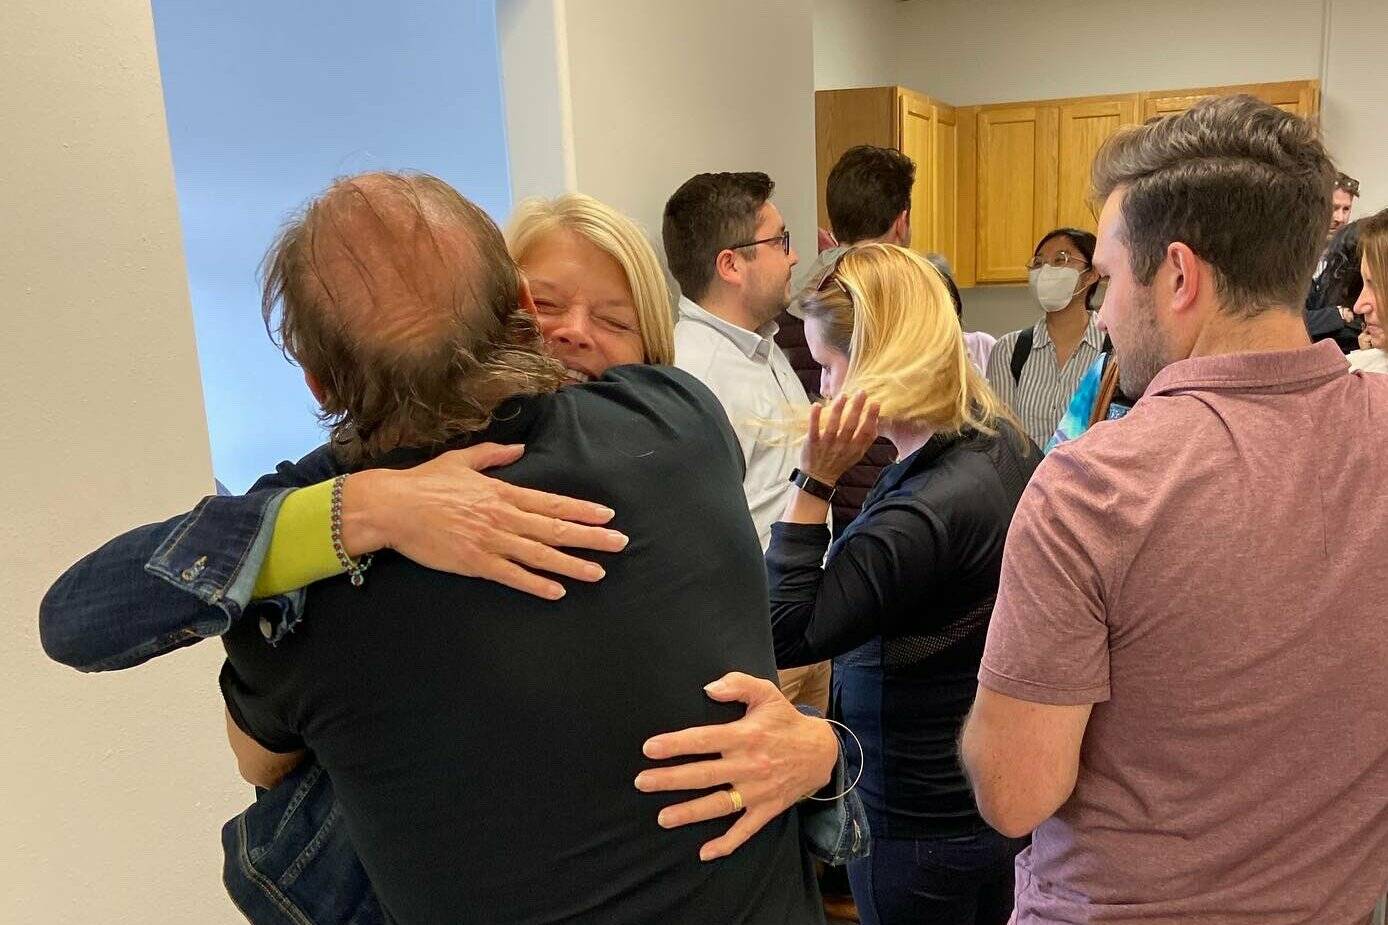 Sen. Lisa Murkowski hugs a supporter during a campaign event in Fairbanks on Friday. The senator announced Monday she tested positive for COVID-19 and as part of her precautionary measures people at her campaign events are being notified. (Courtesy Photo / LisaForSenate, Twitter)